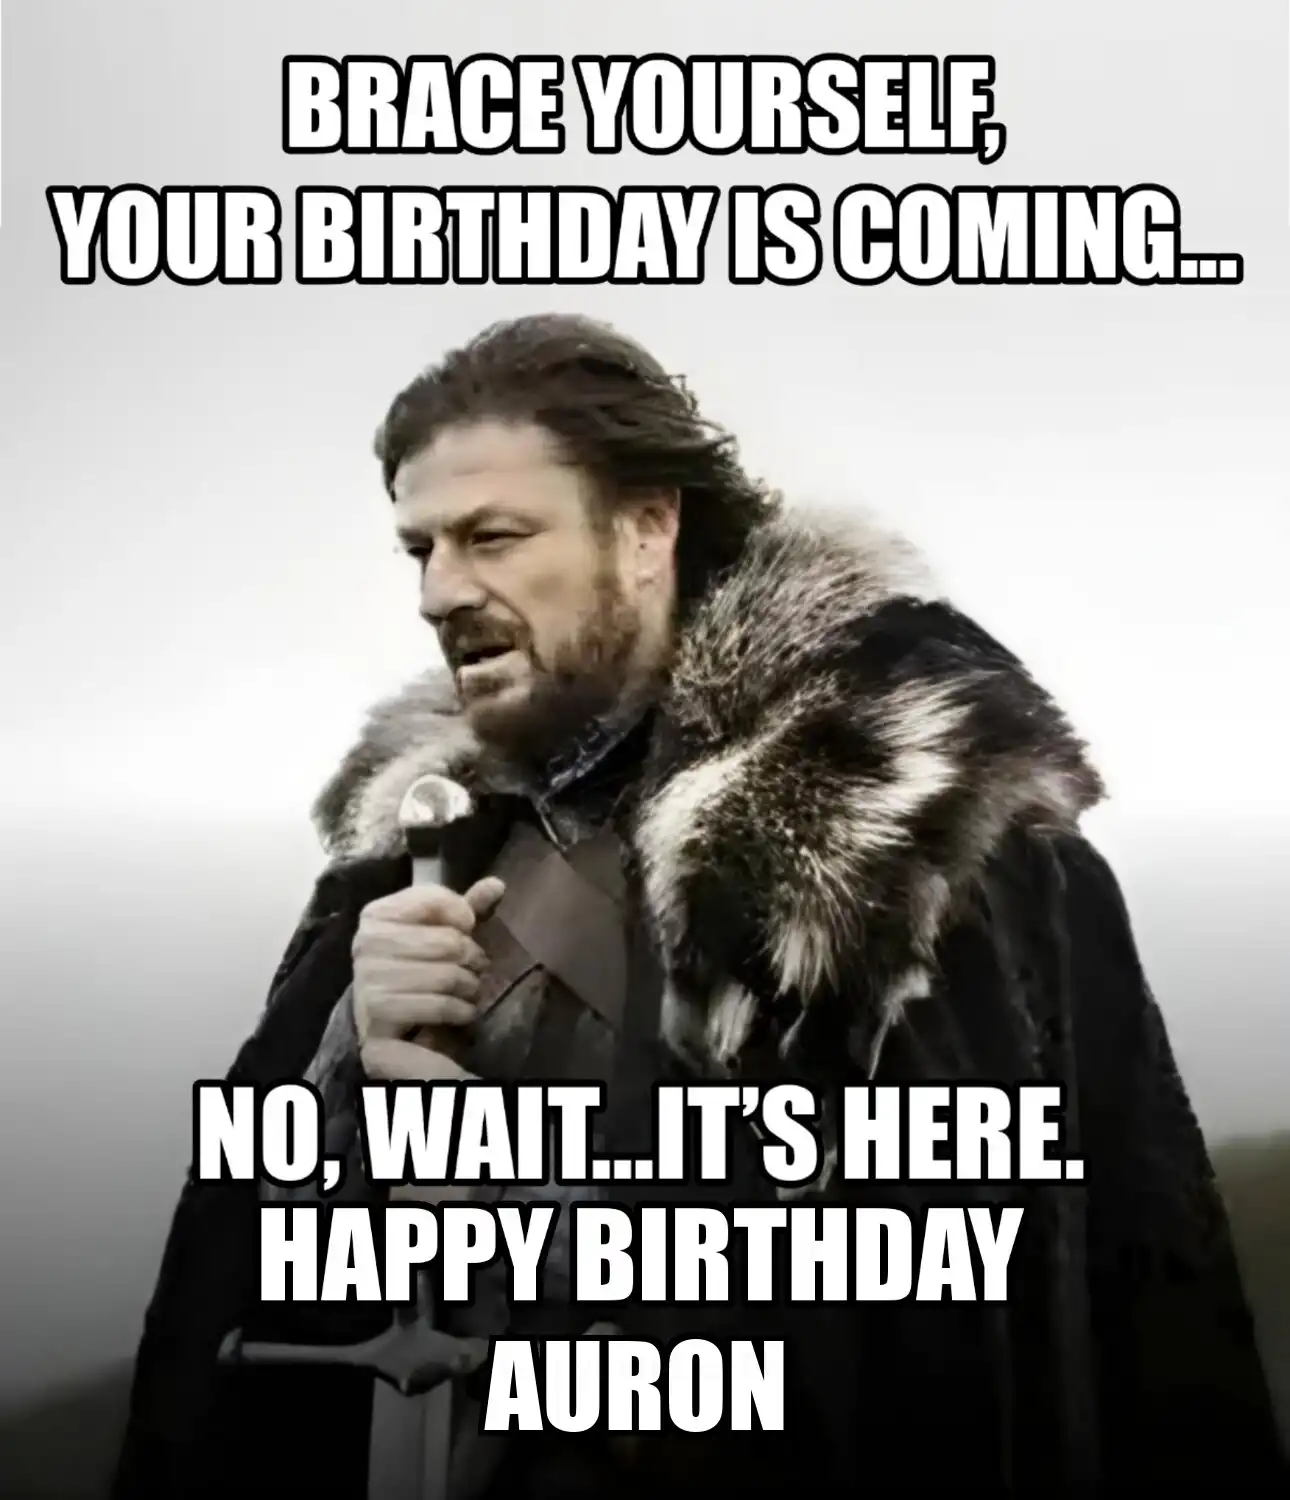 Happy Birthday Auron Brace Yourself Your Birthday Is Coming Meme